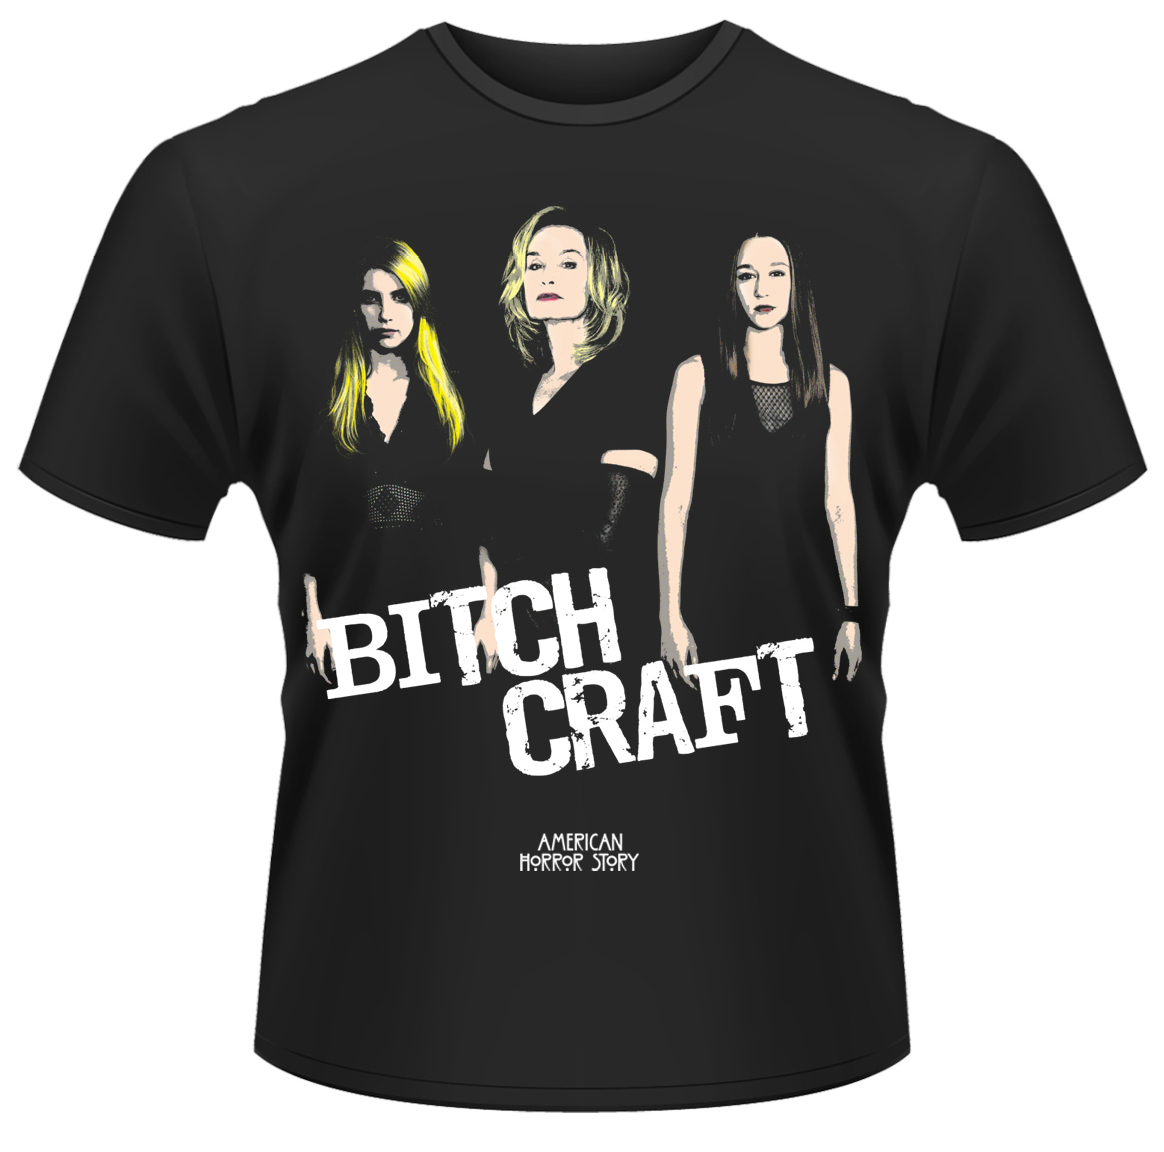 American Horror Story 'Bitch Craft' T-Shirt - NEW & OFFICIAL! - Afbeelding 1 van 1